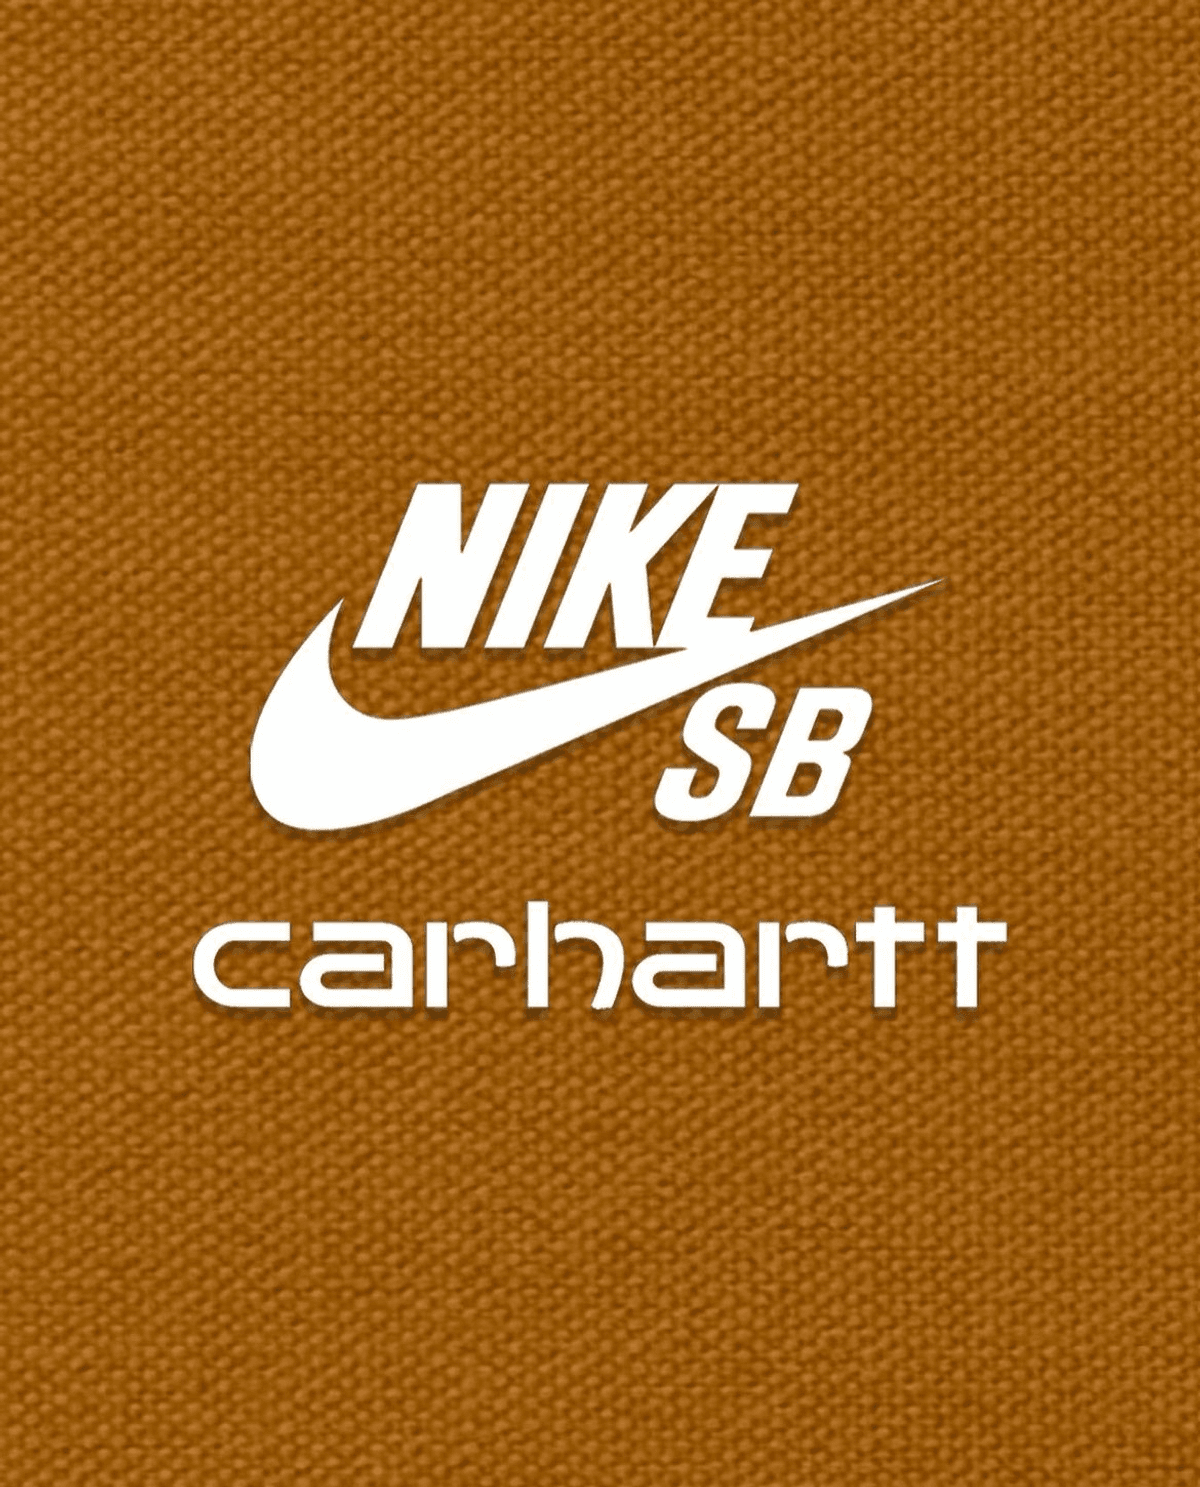 Rumors Of A Carhartt And Nike SB Collaboration Have Begun Going Through The Grapevine